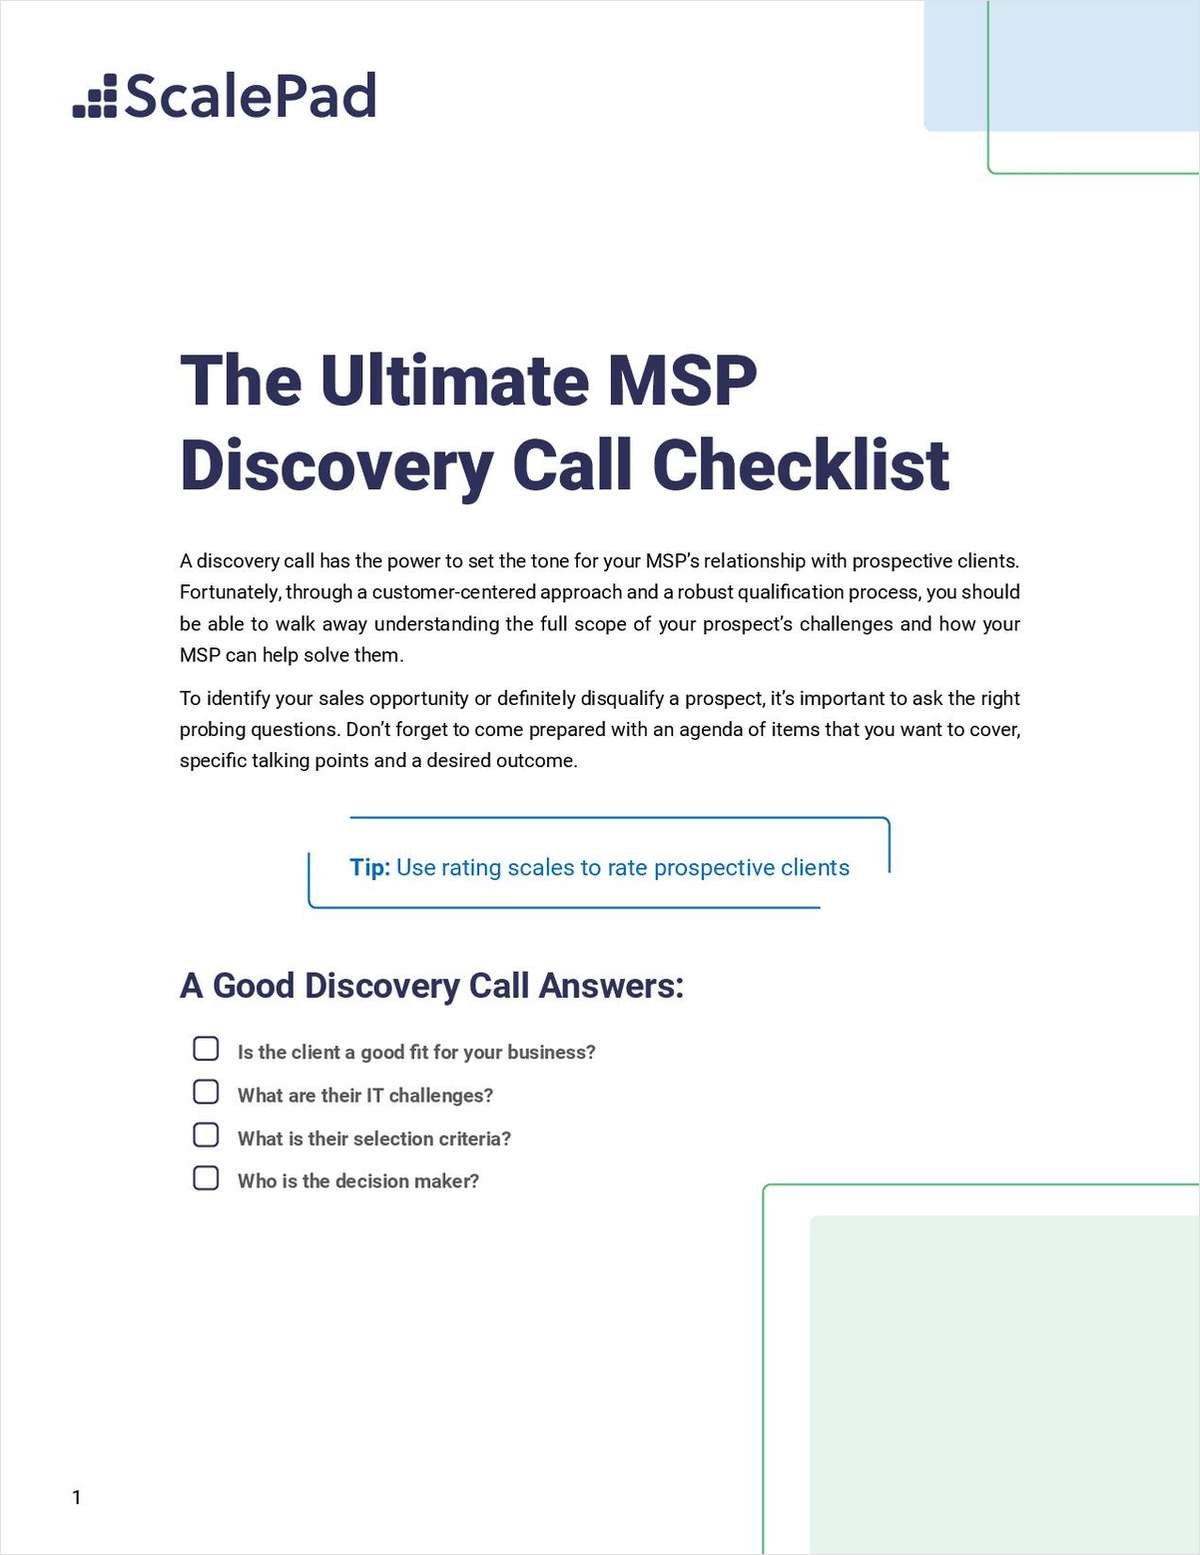 The Ultimate MSP Discovery Call Checklist